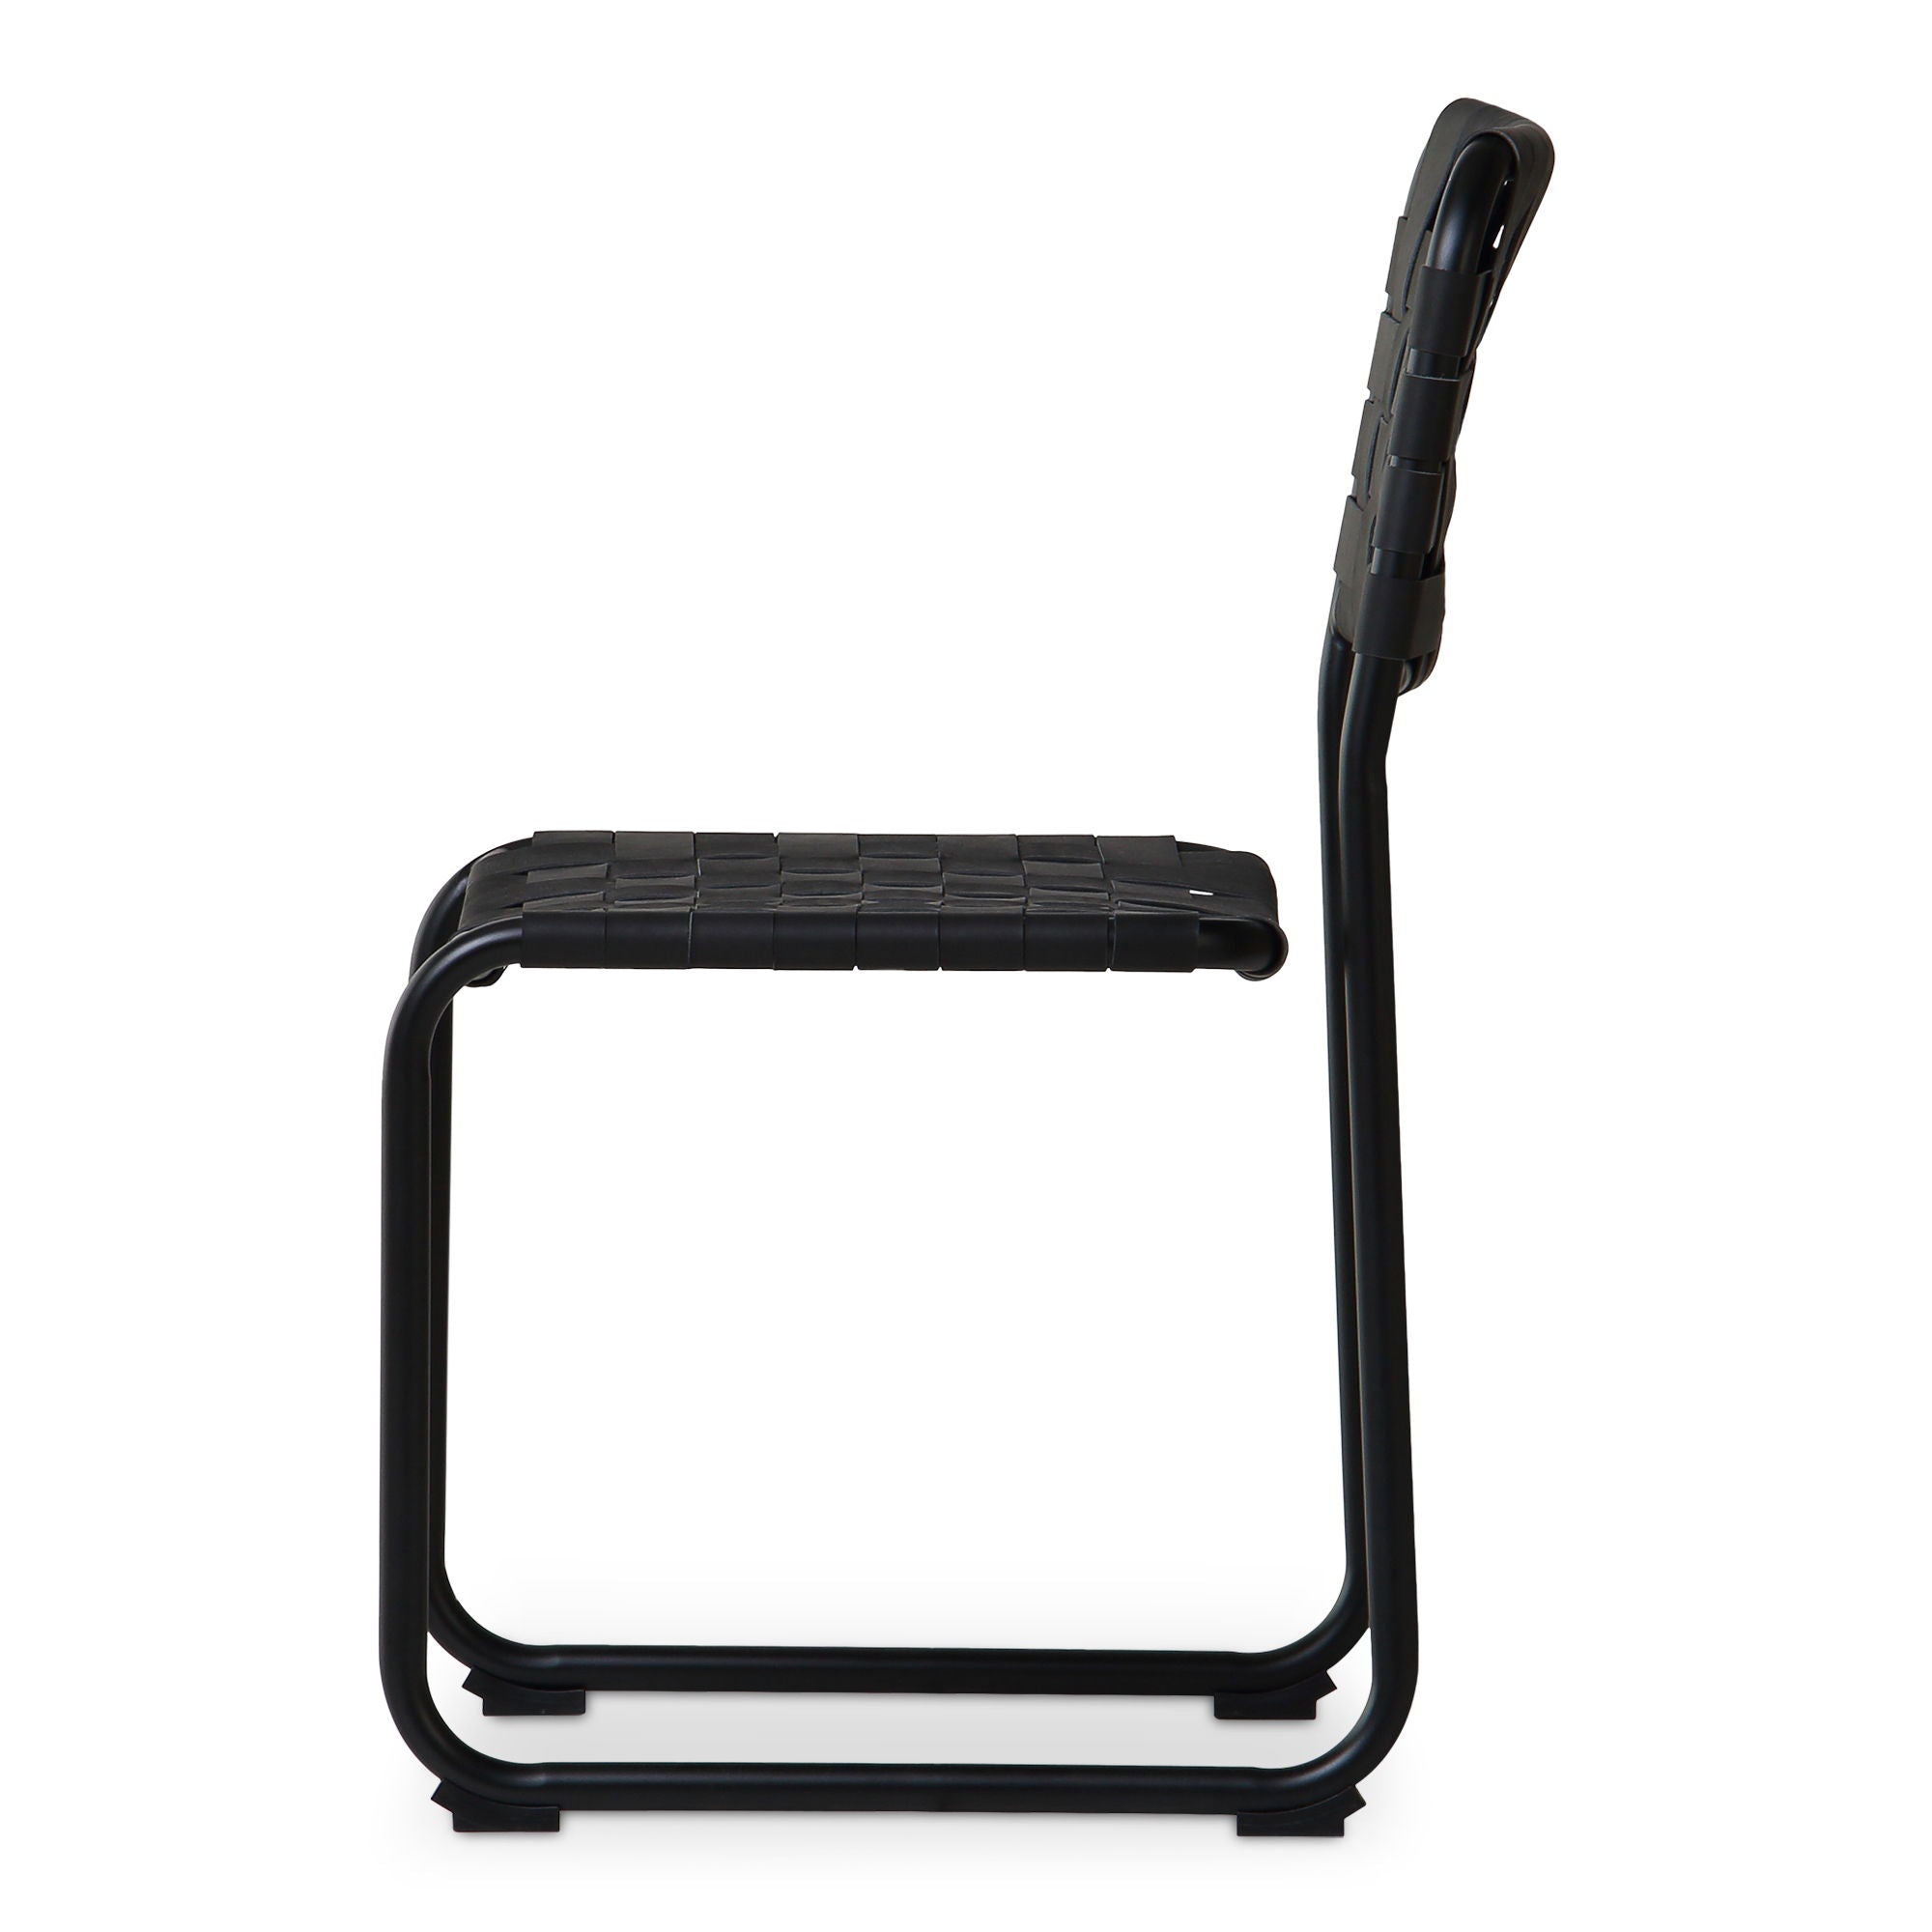 Moma - Dining Chair (Set of 2) - Black